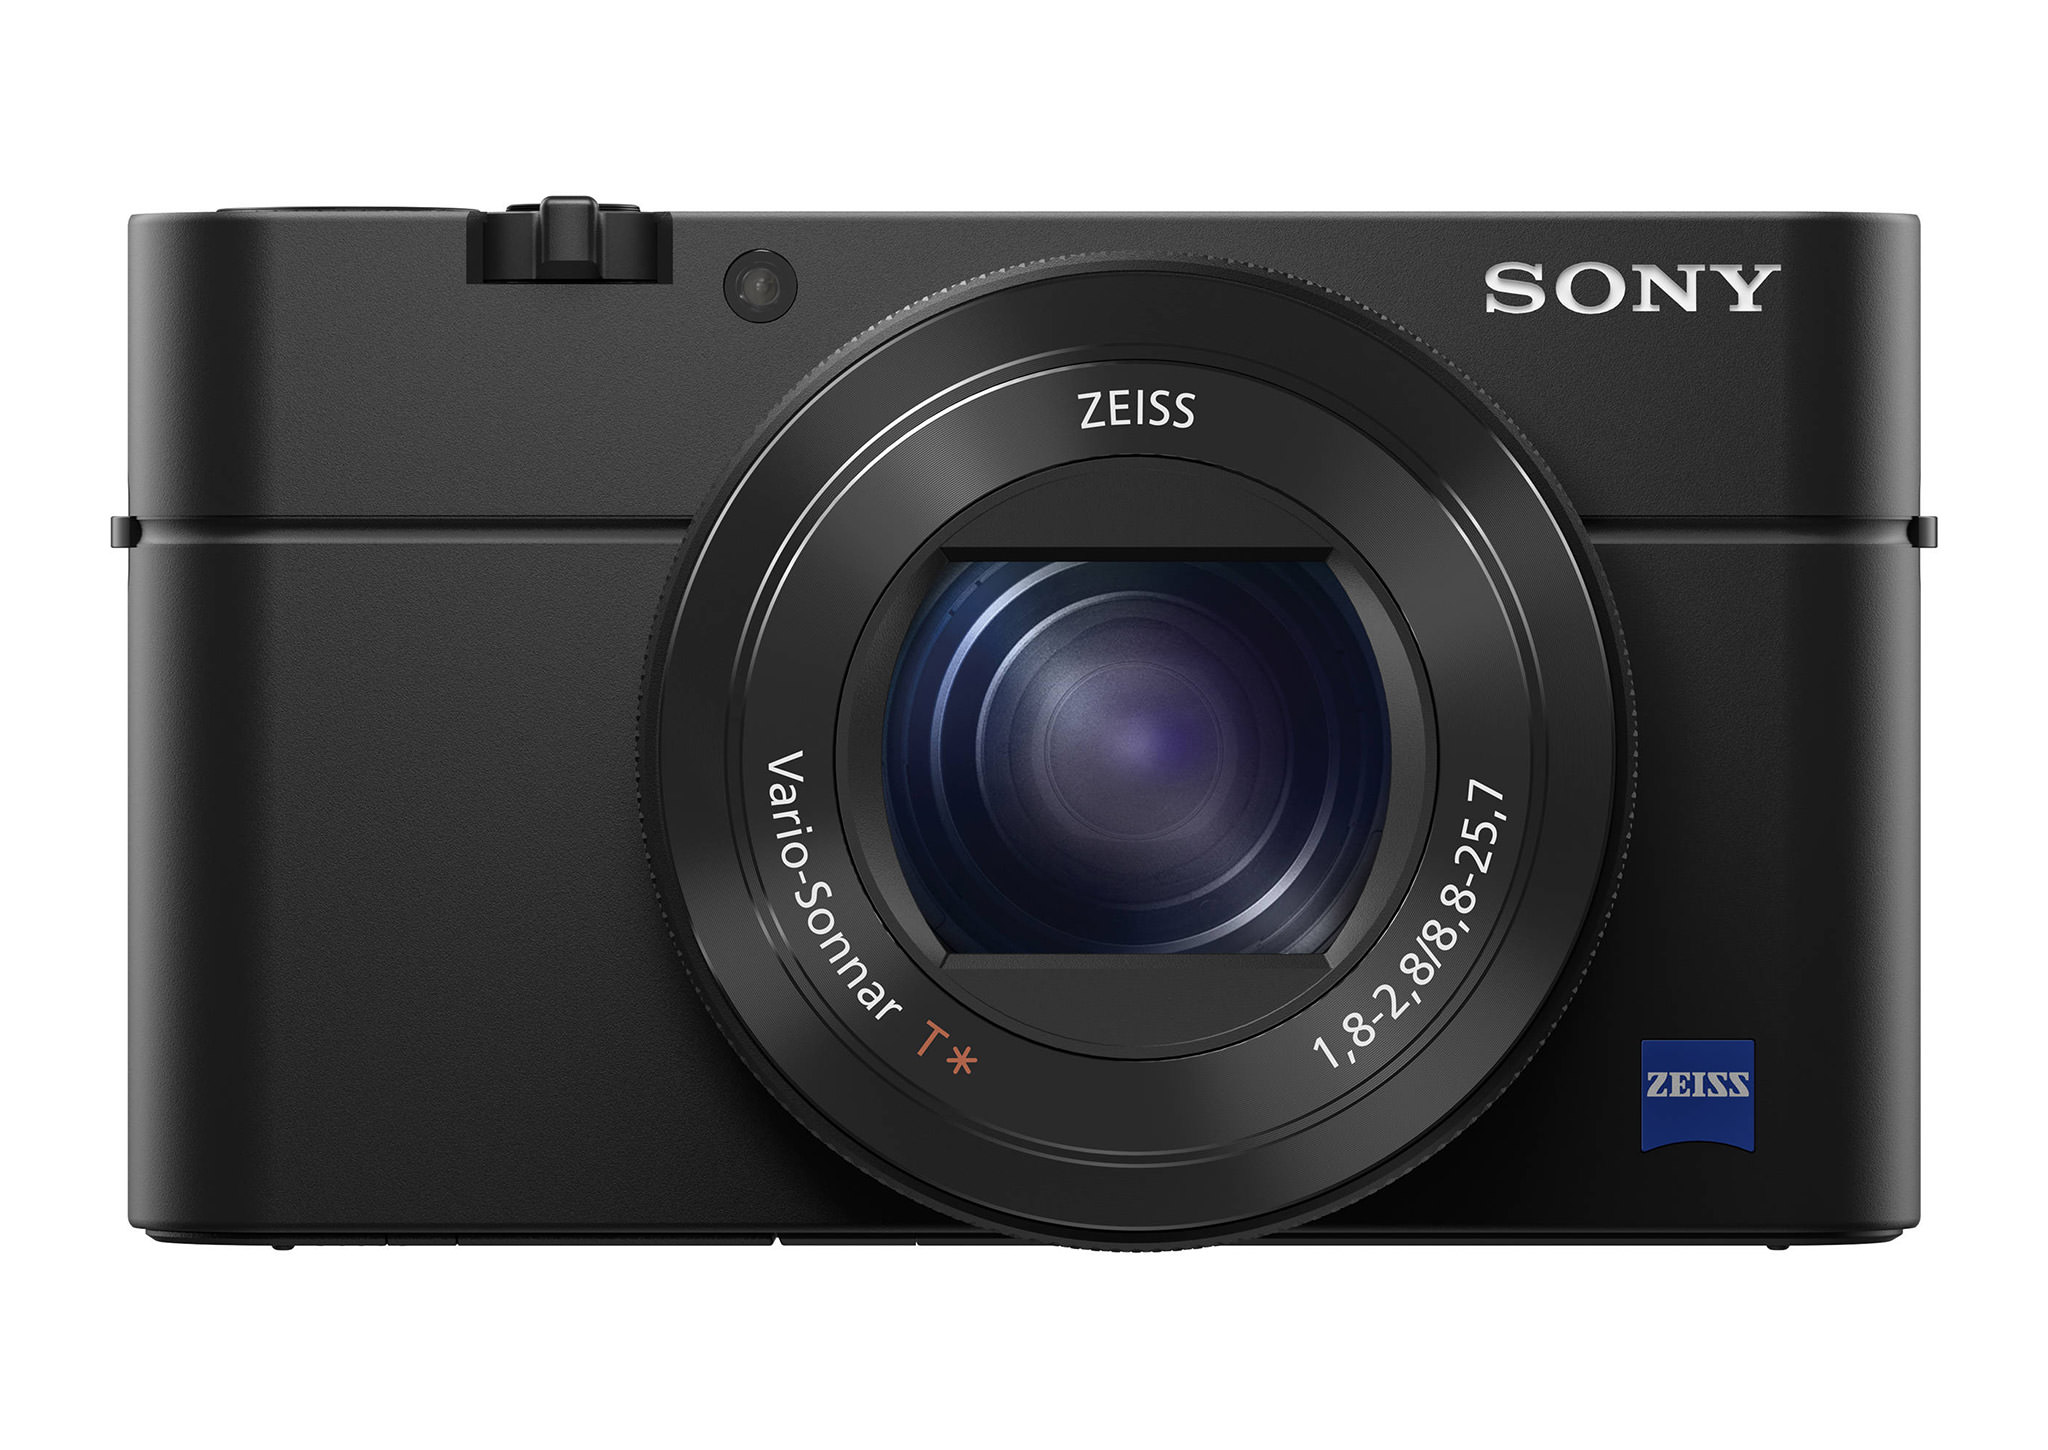 Review: Sony rx100 I (the original) - The Best Deal in Photography? — Luke  Taylor - Photography